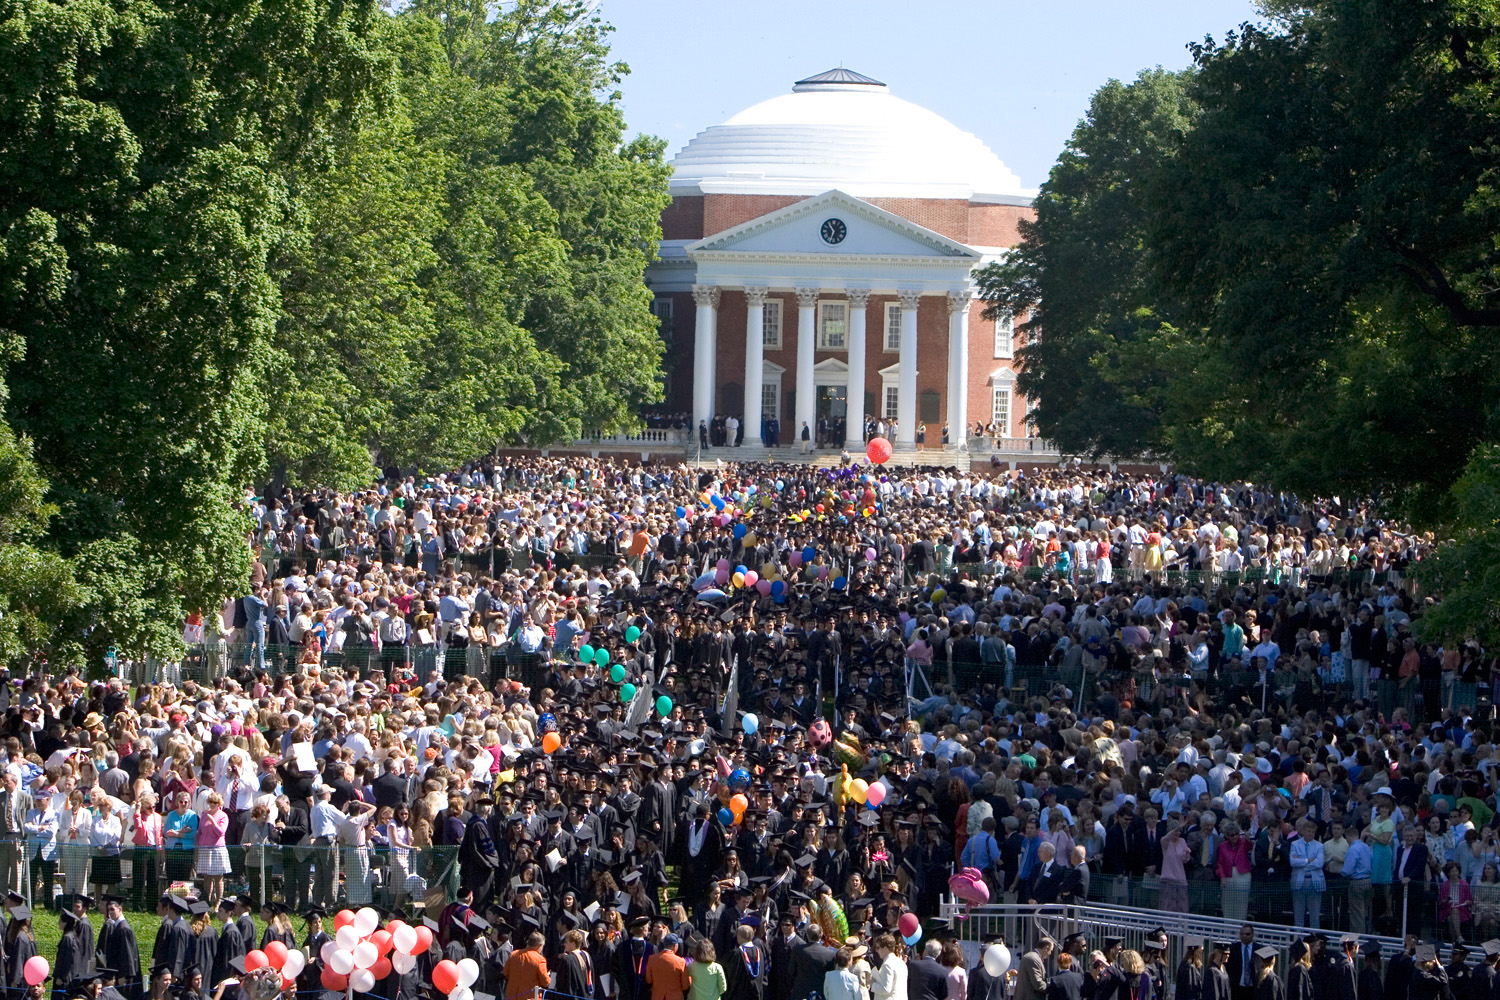 The Lawn full of graduates and families as the graduates walk to their seats with the Rotunda in the background